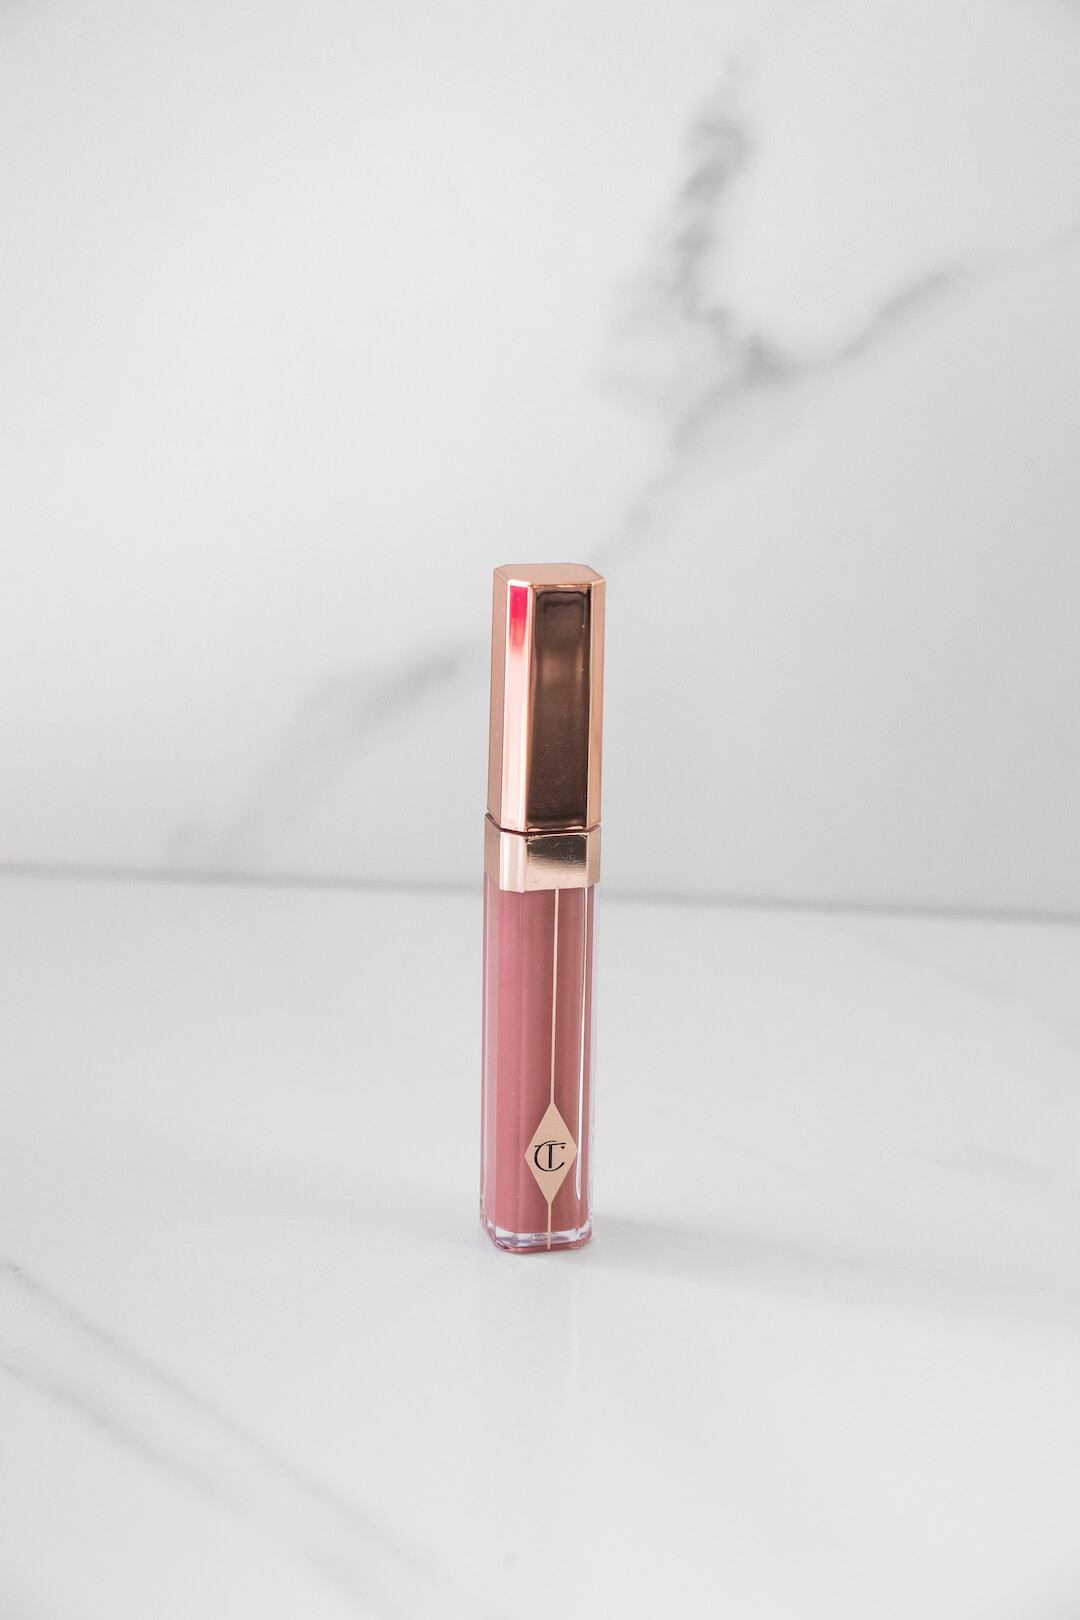 Charlotte Tilbury Pillow Talk Collection Review